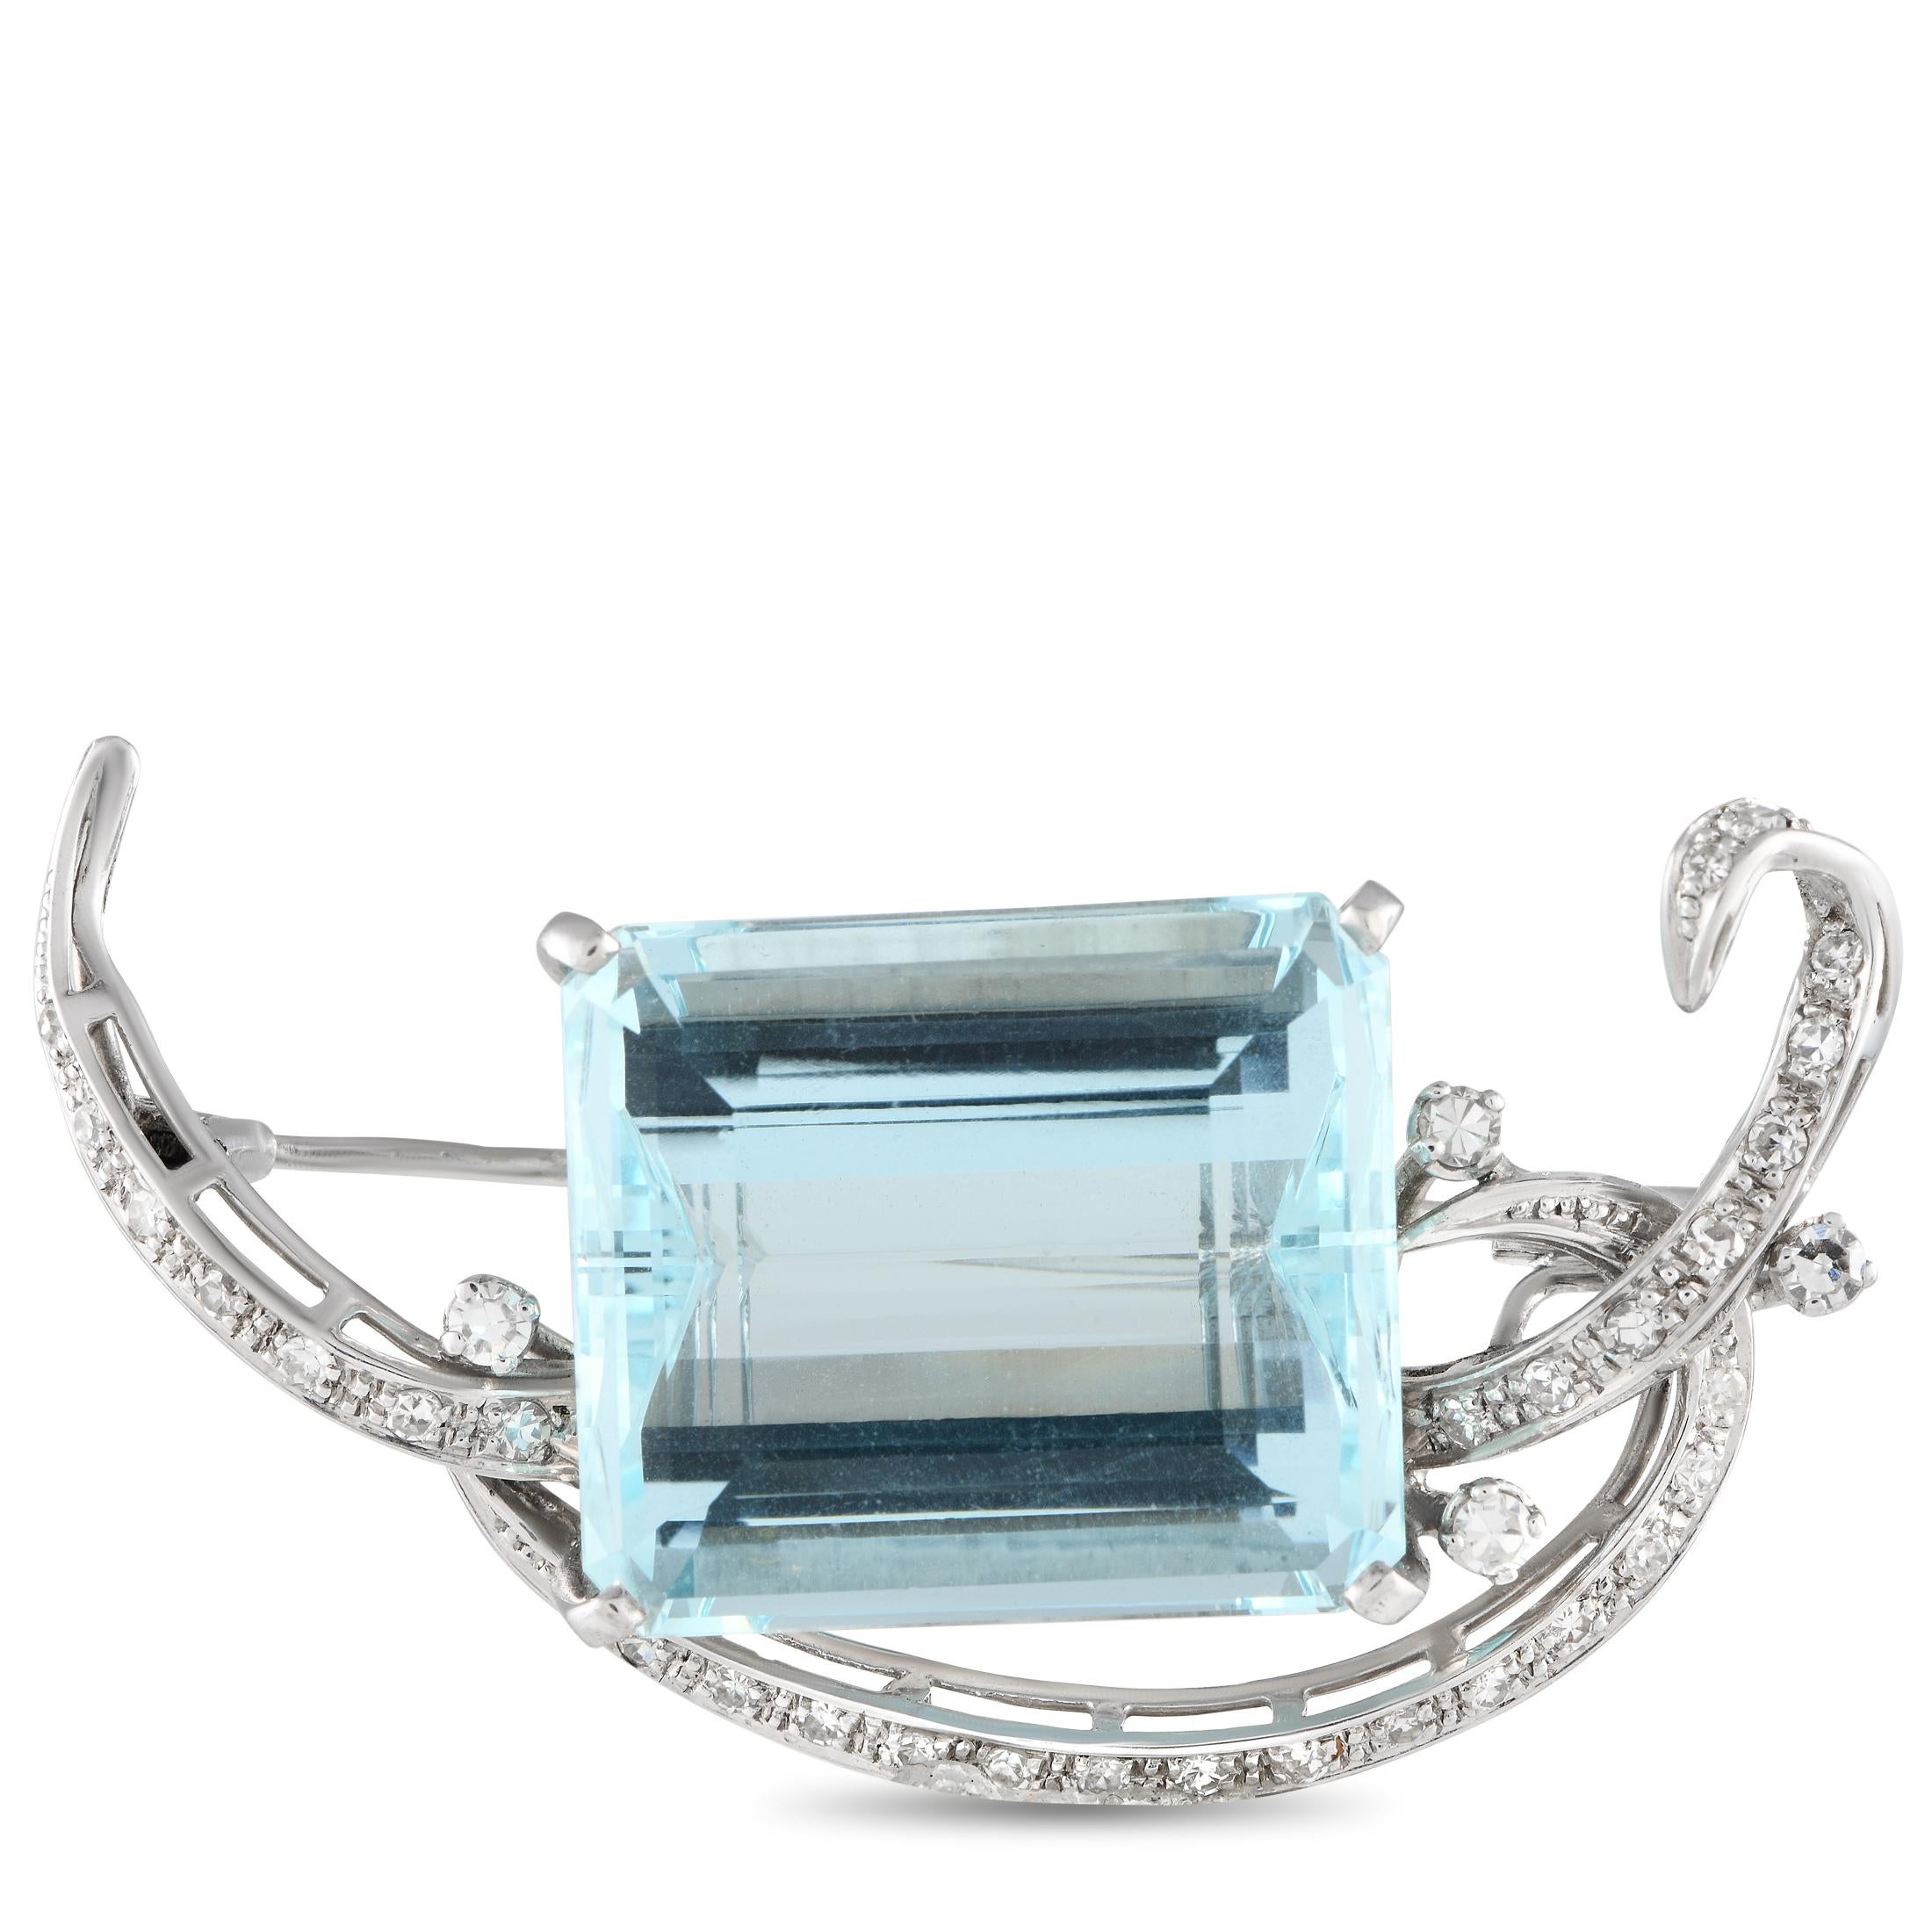 Round Cut 18K White Gold 0.55ct Diamond and Aquamarine Brooch MF26-012324 For Sale